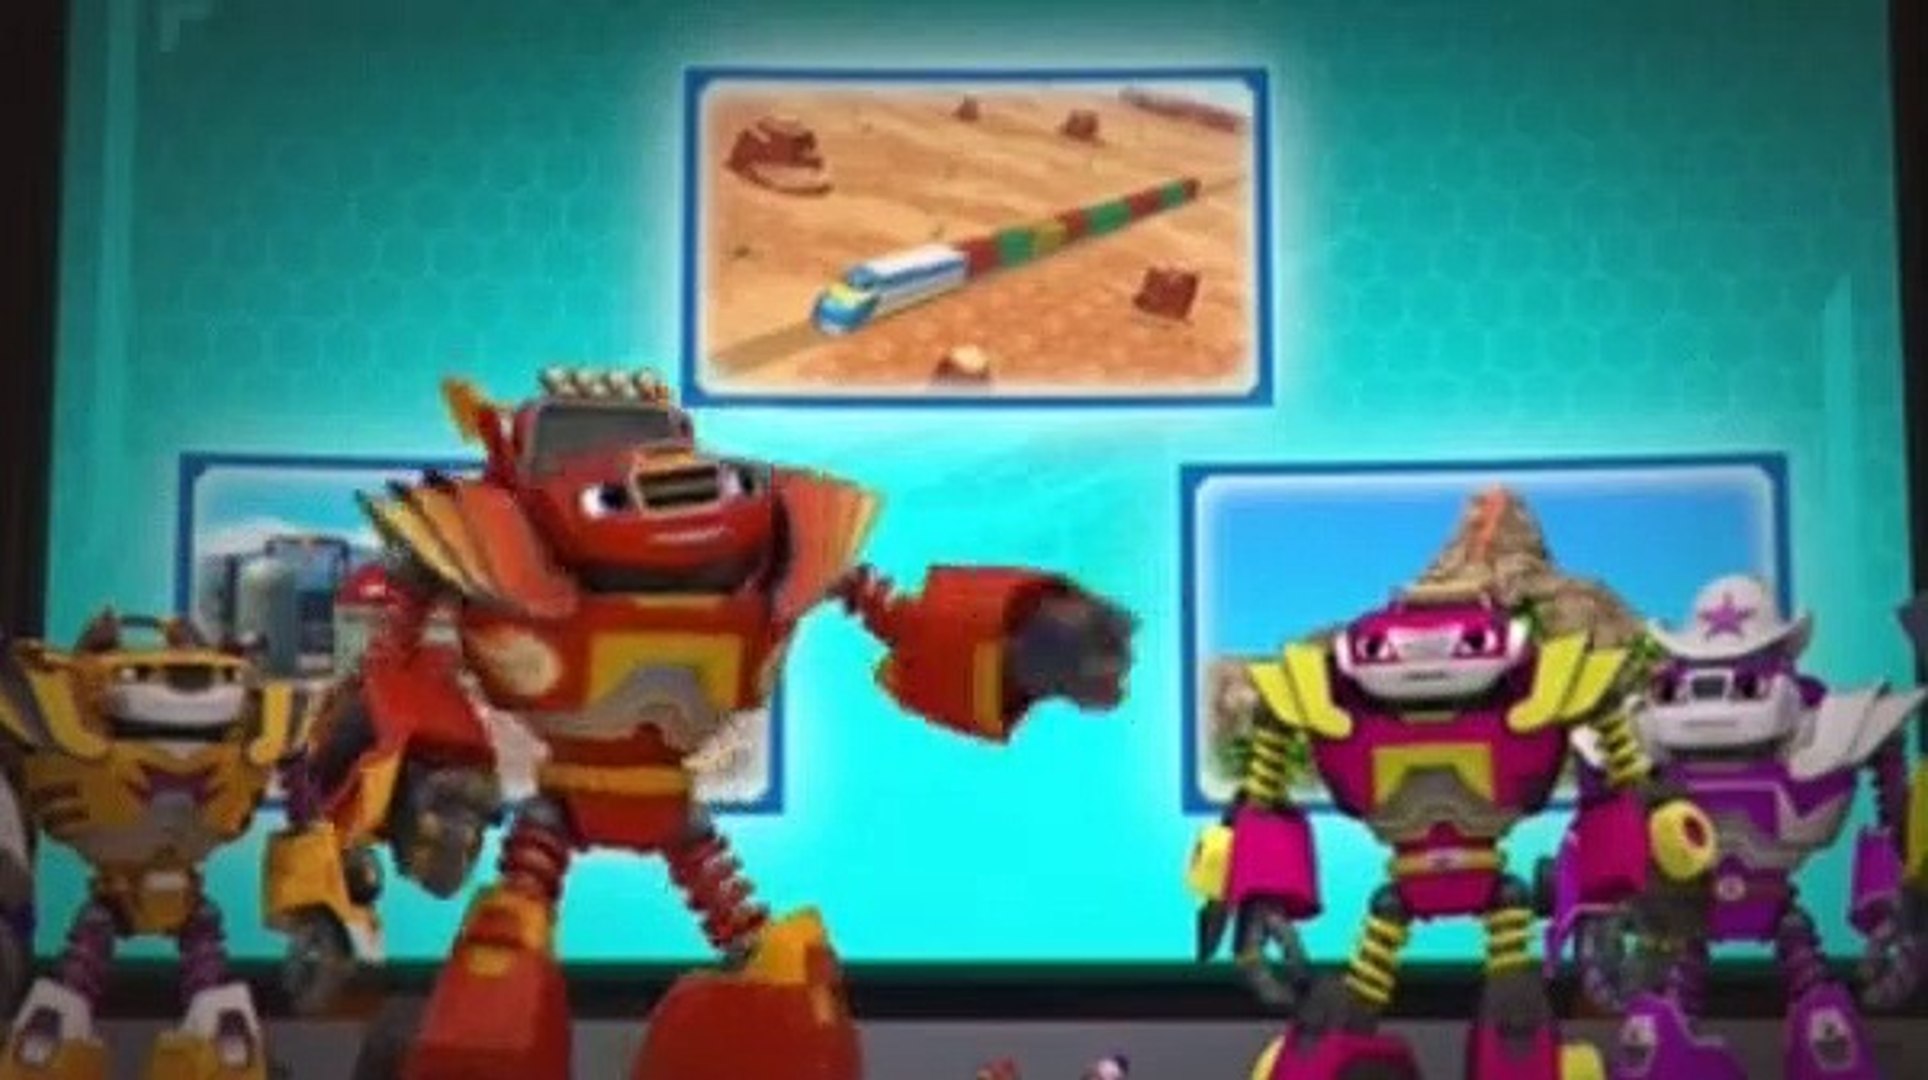 Blaze And The Monster Machines S04E05 Robots To The Rescue - video  Dailymotion